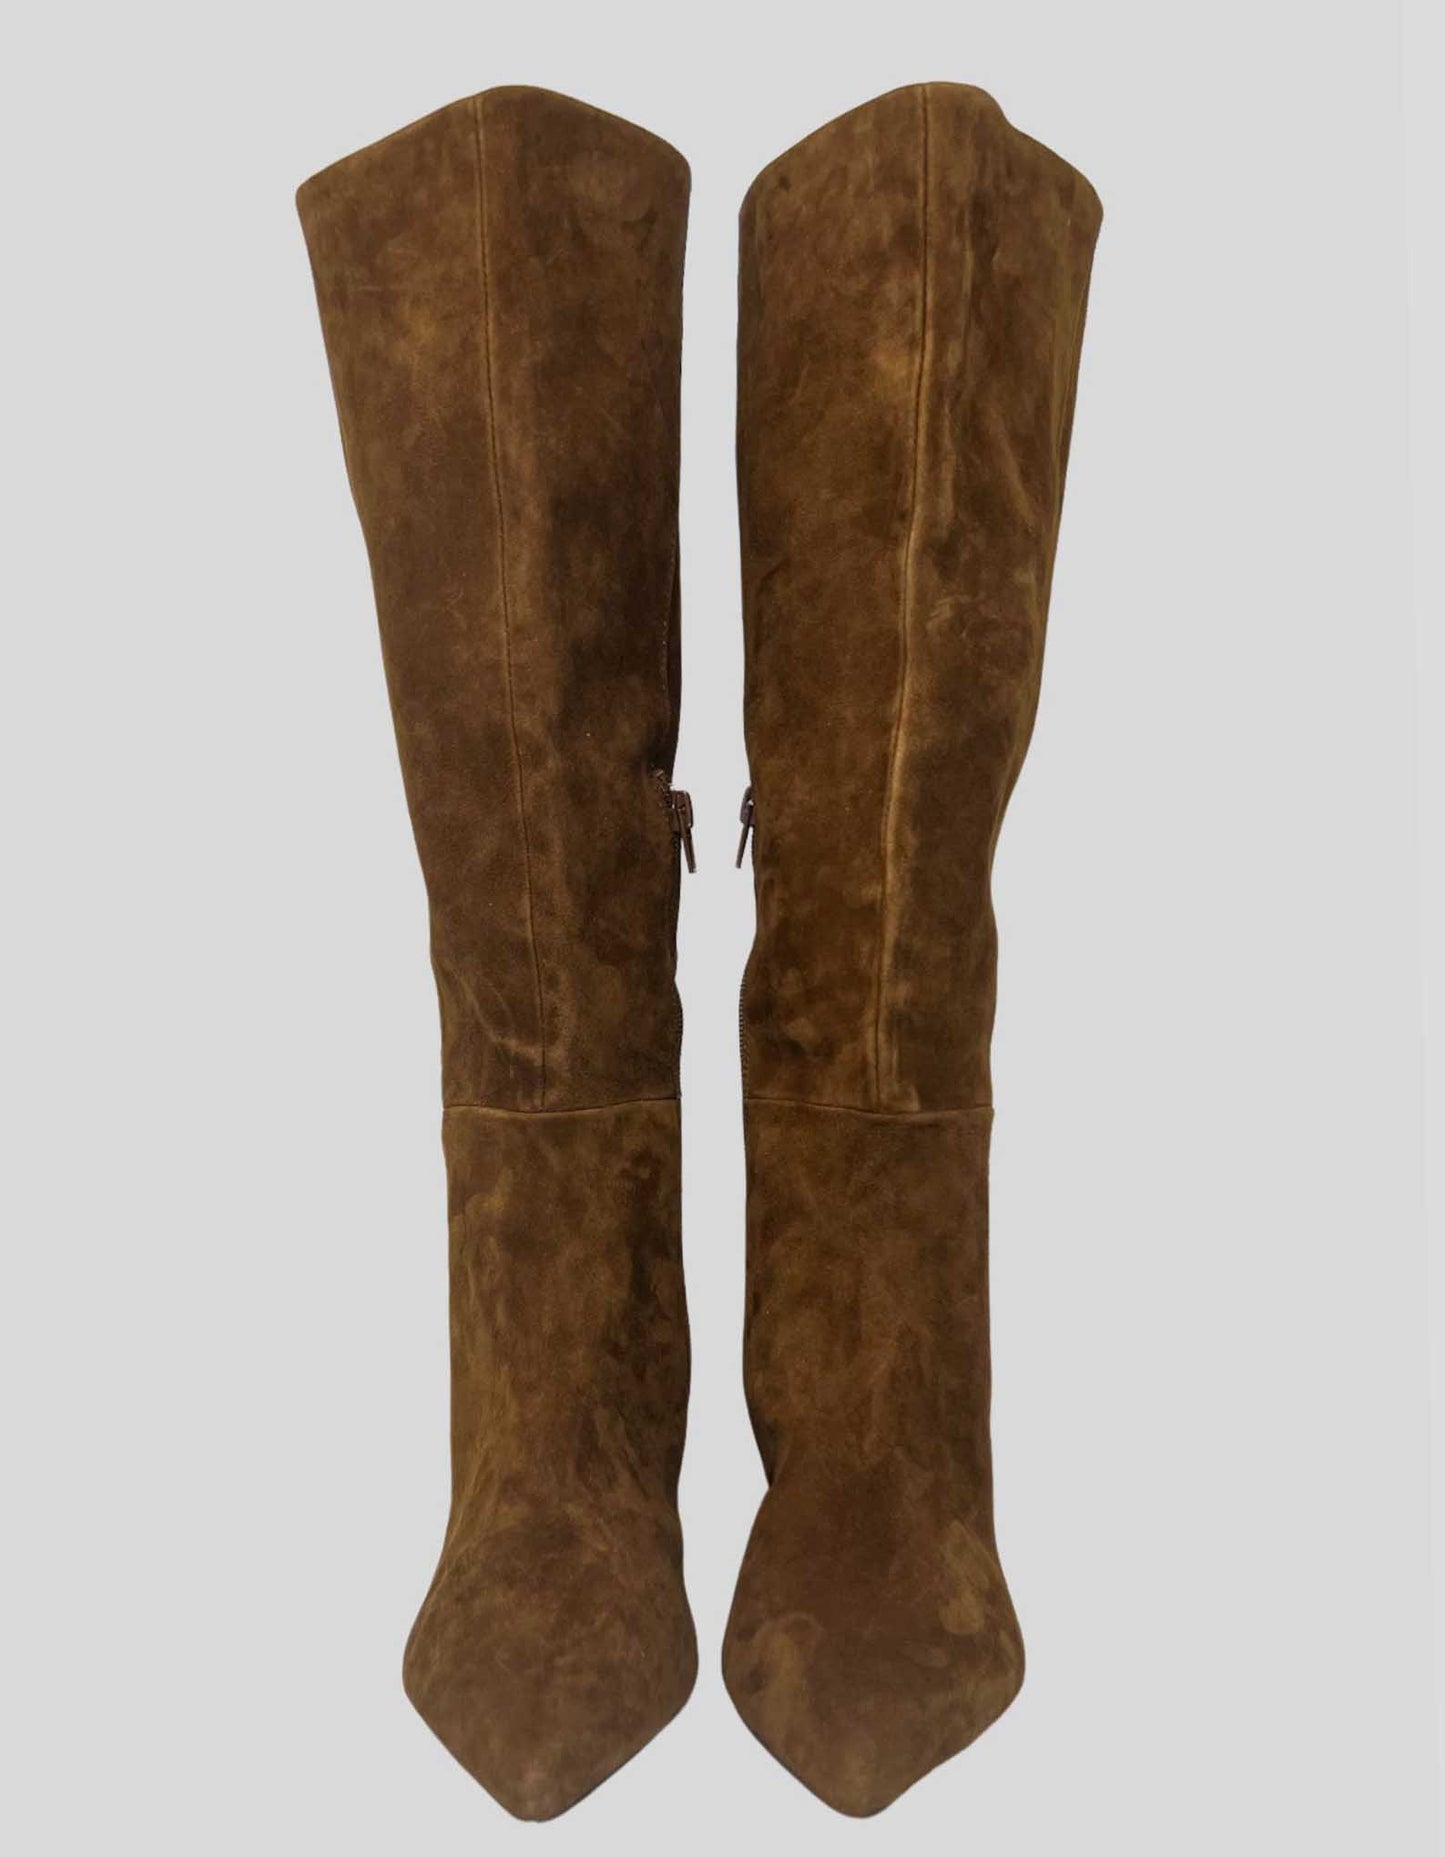 Steve Madden Forrest Suede Pointed Toe Knee-High Boots - 9.5M US